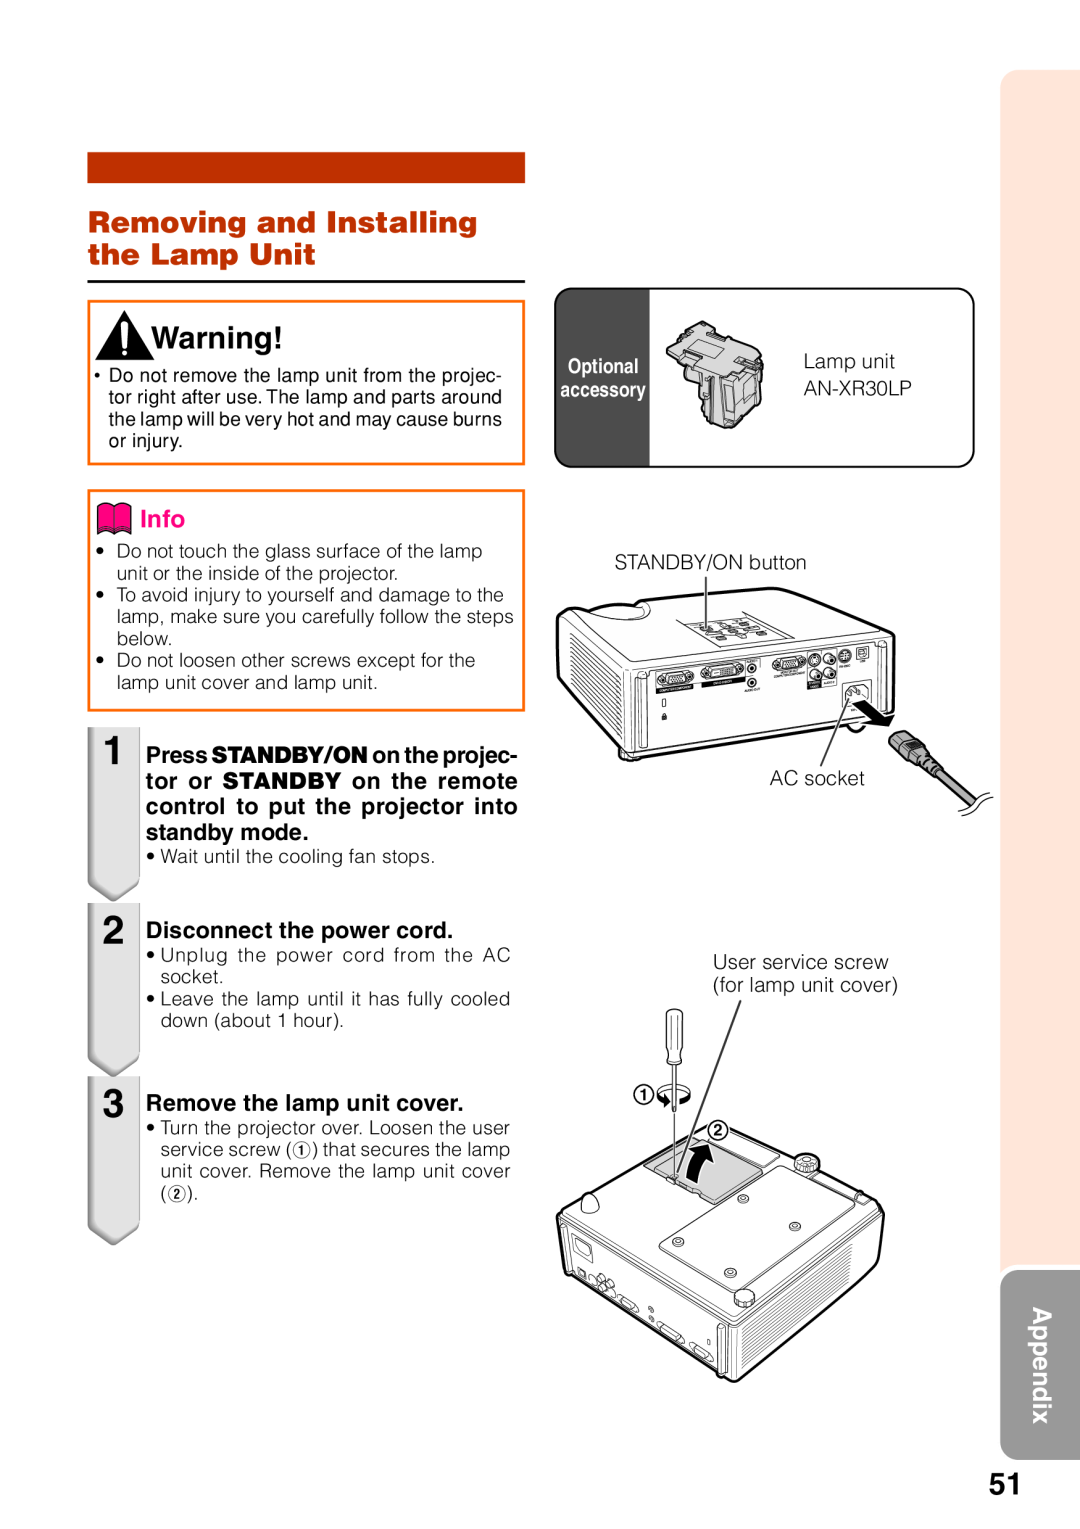 Sharp XR-40X Removing and Installing the Lamp Unit, Info, Appendix, Disconnect the power cord, Remove the lamp unit cover 